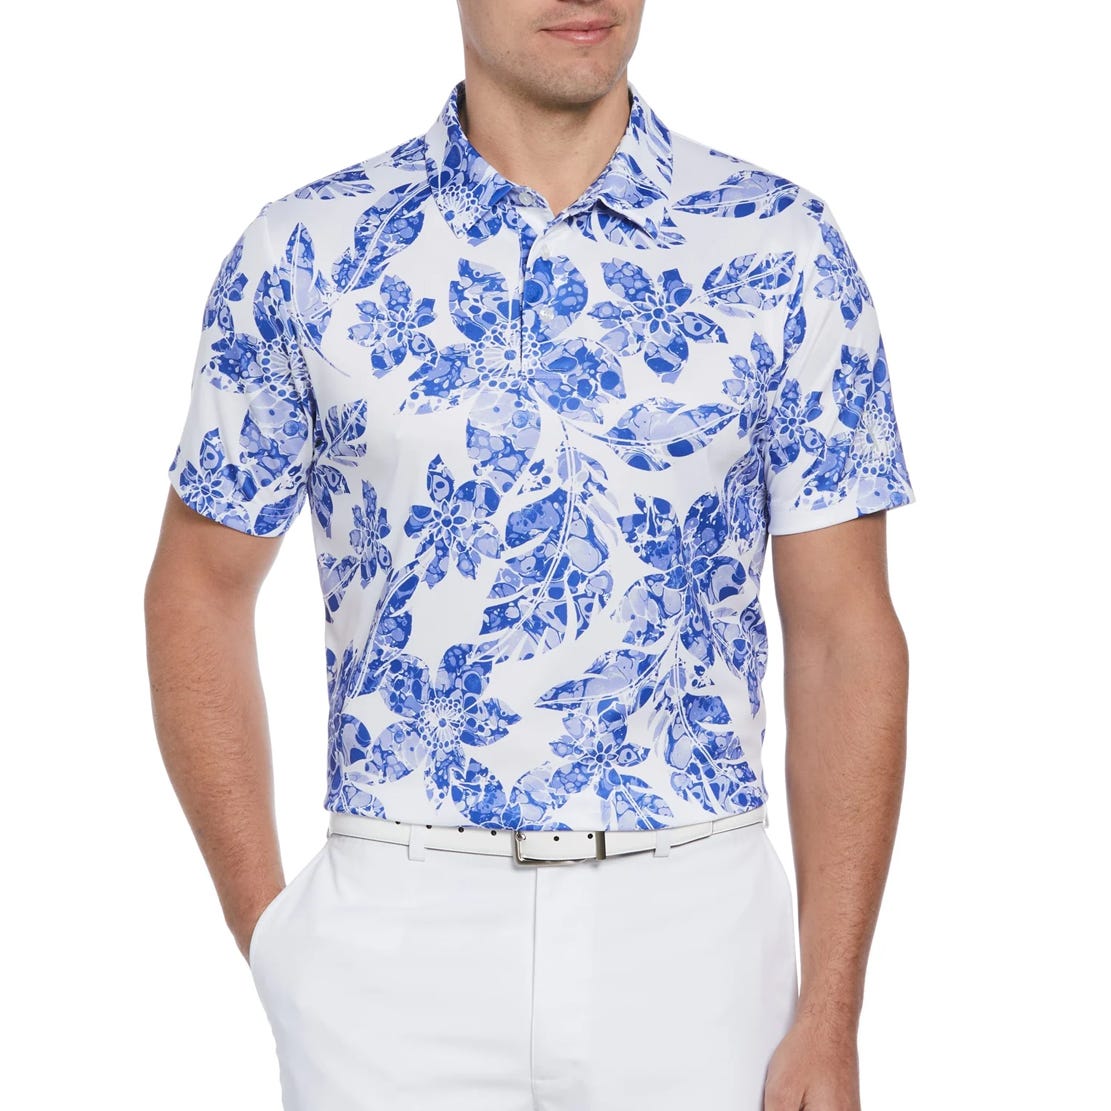 A man wearing a blue and white floral print short-sleeved shirt and white pants.